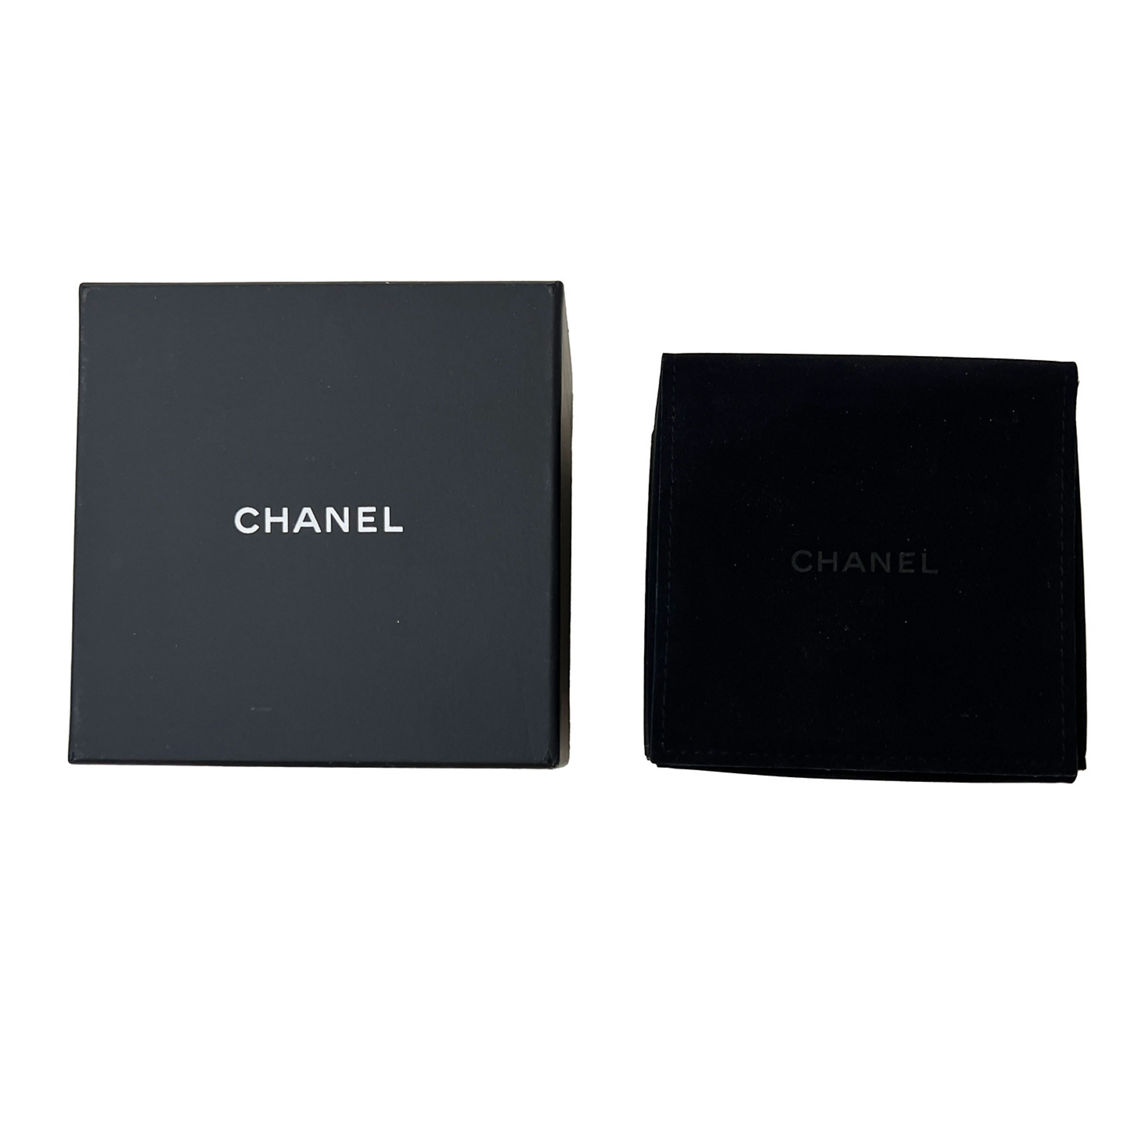 Chanel B 22 K Pendant Pre-Owned - Image 3 of 3